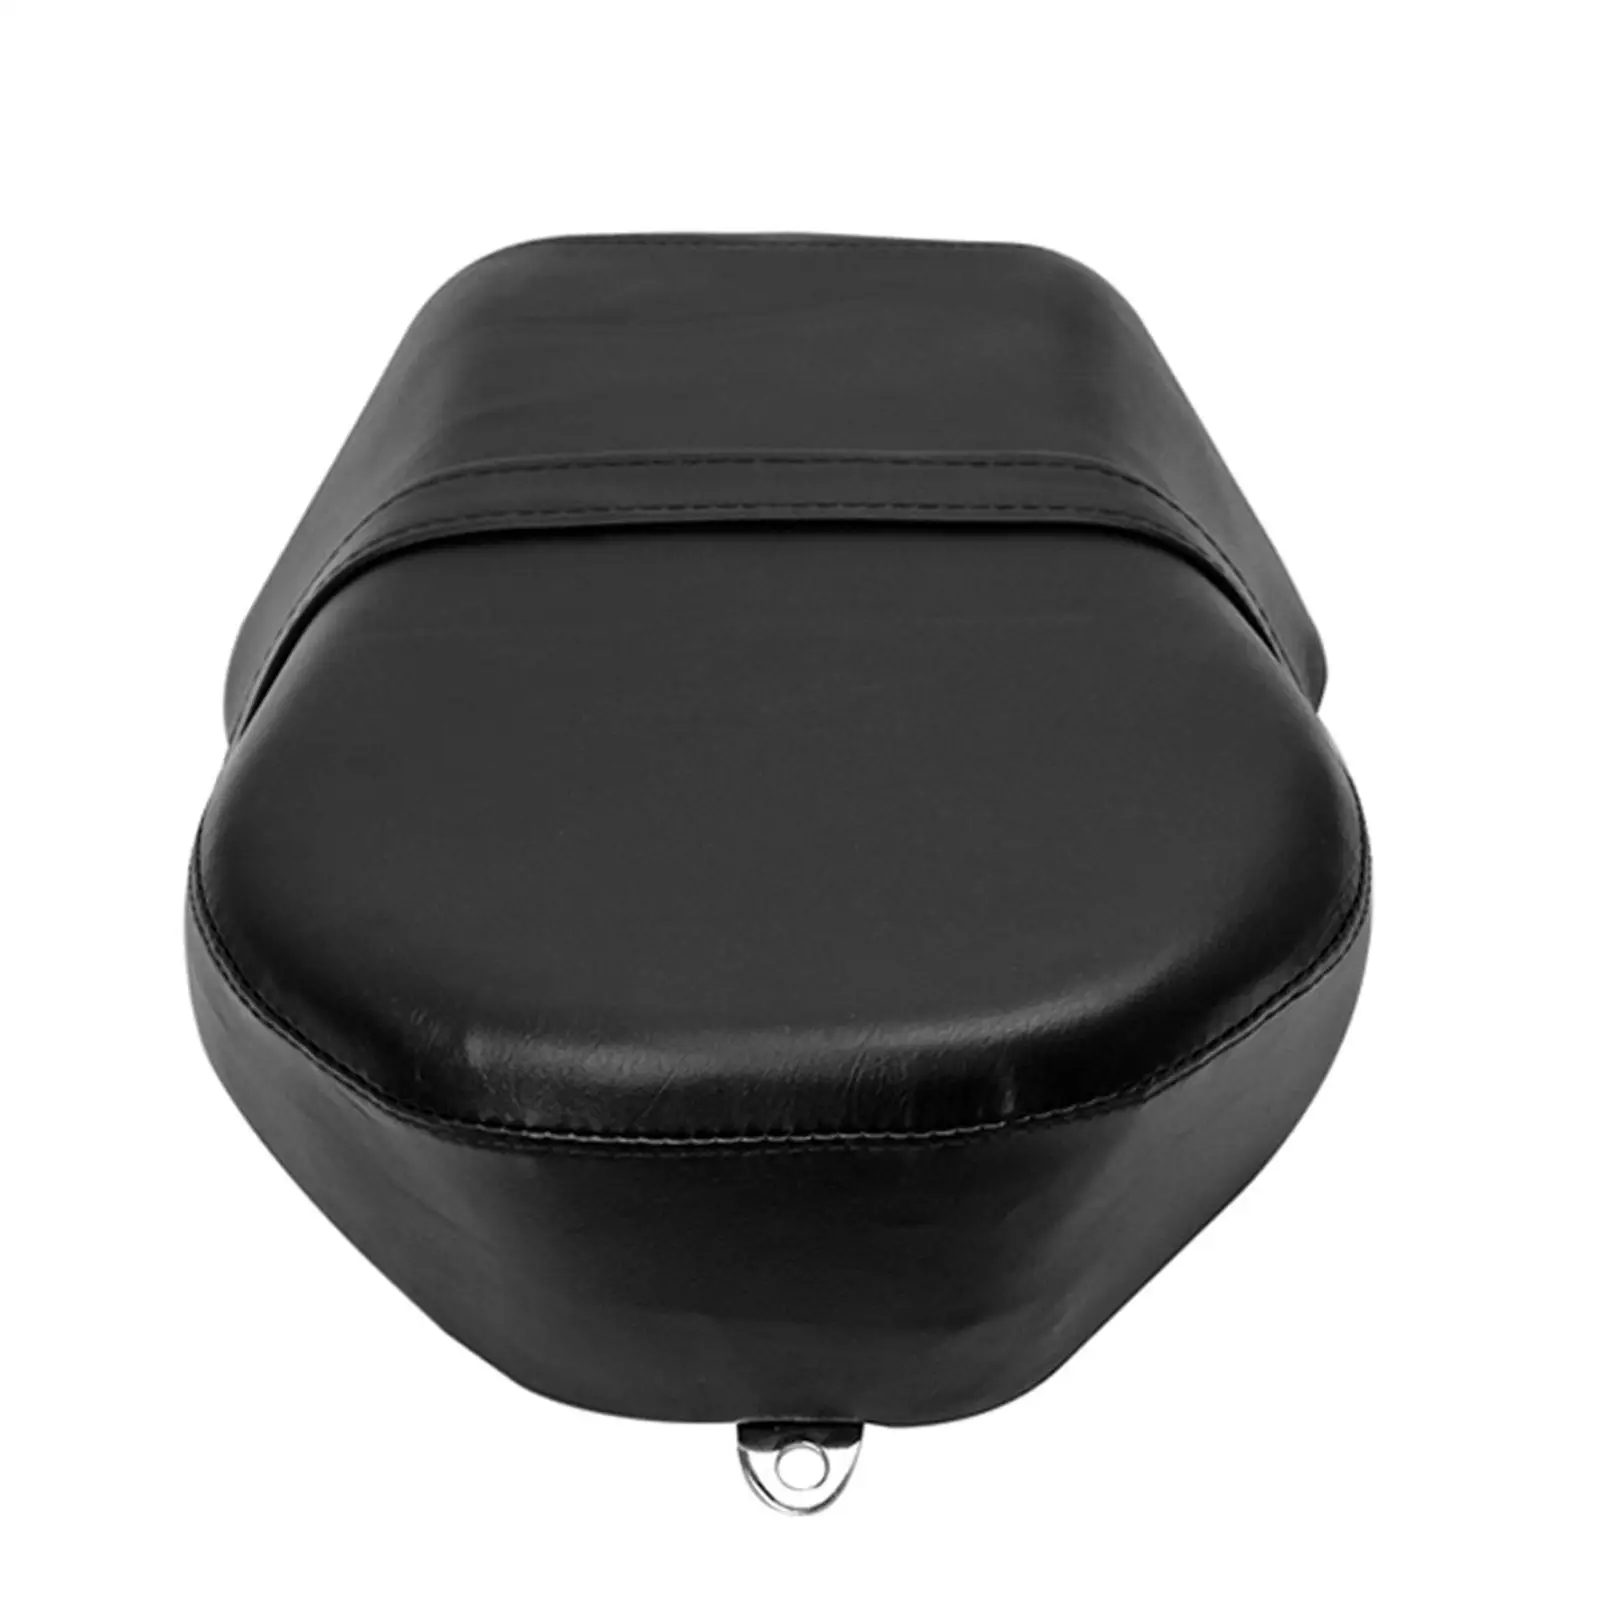 PU Leather Motorcycle Pillion Passenger Pad Seat for Harley Sportster 883 1200